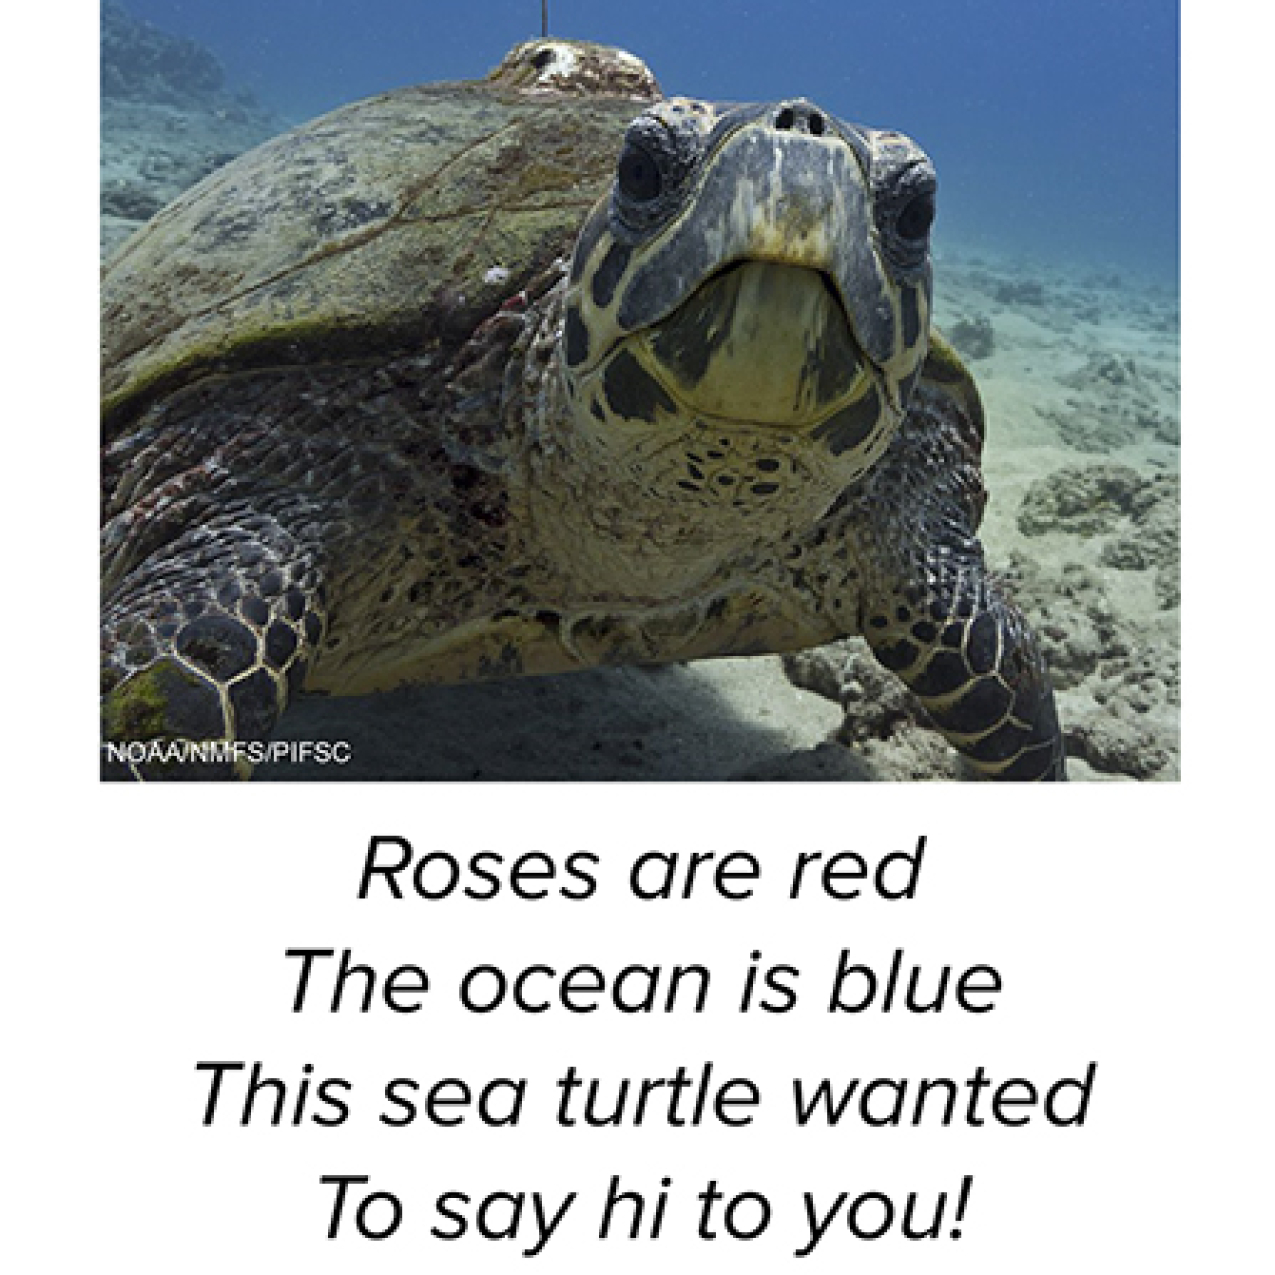 A printable two-sided valentine. The front side has a photo of a sea turtle and reads “Roses are red, the ocean is blue. This sea turtle wanted to say hi to you!” The back side reads “This hawksbill sea turtle, one of six endangered species of sea turtles in the U.S., has a GPS-linked satellite tag allowing NOAA researchers to track its movements. You can help sea turtles by properly disposing of trash, reducing plastic use, and not disturbing the beaches where they lay their eggs.”